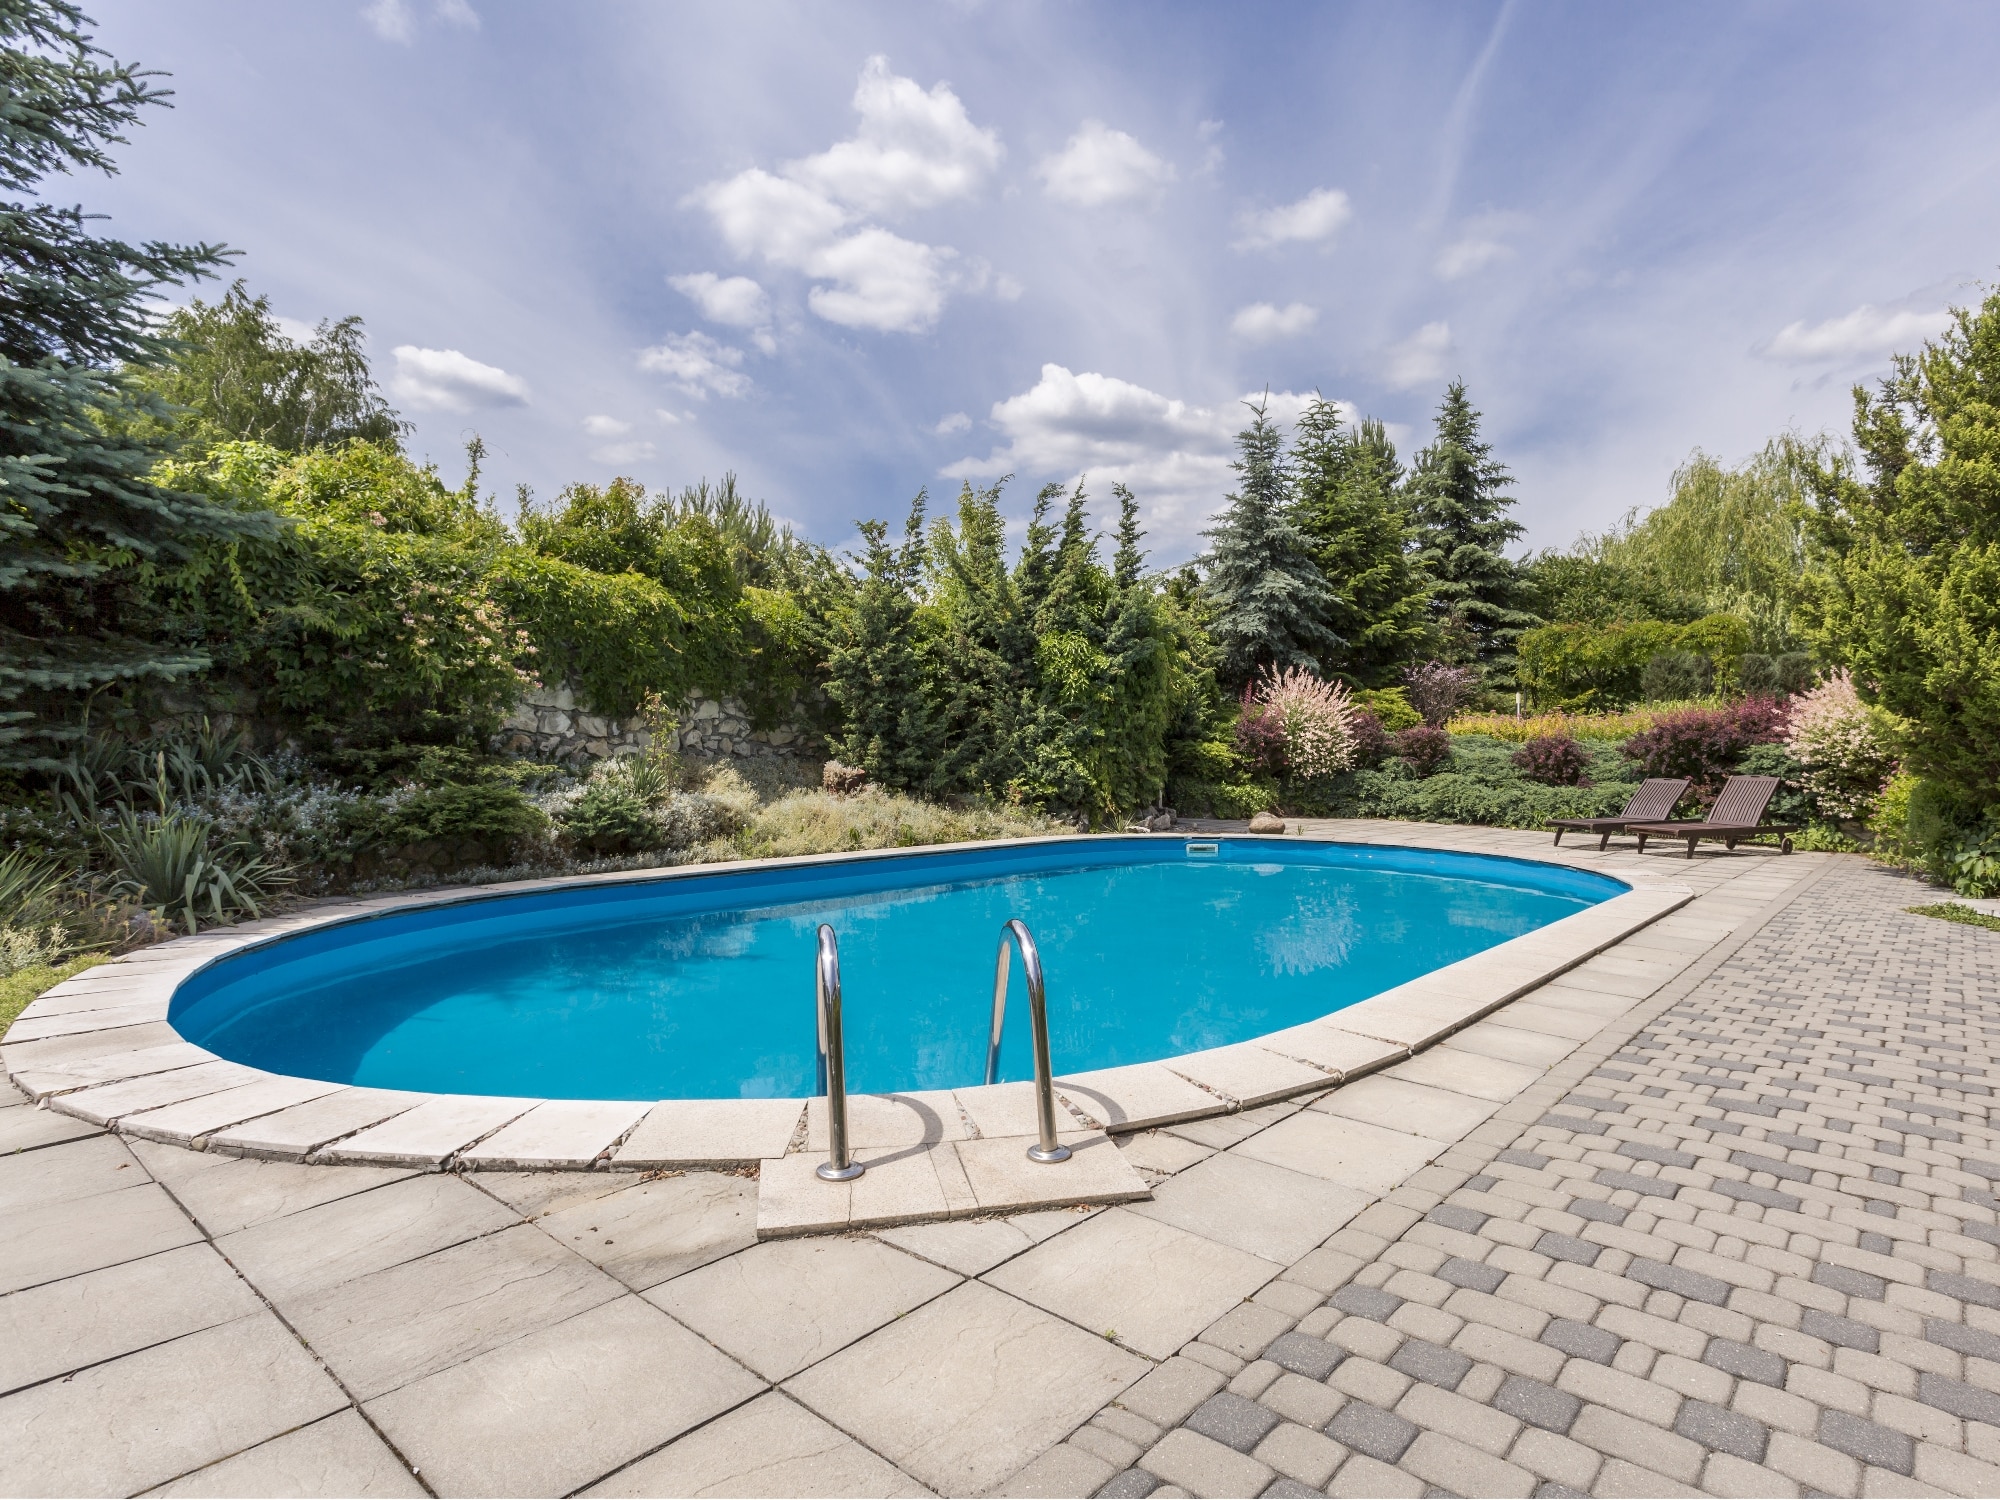 Luxury pool deck with pavers